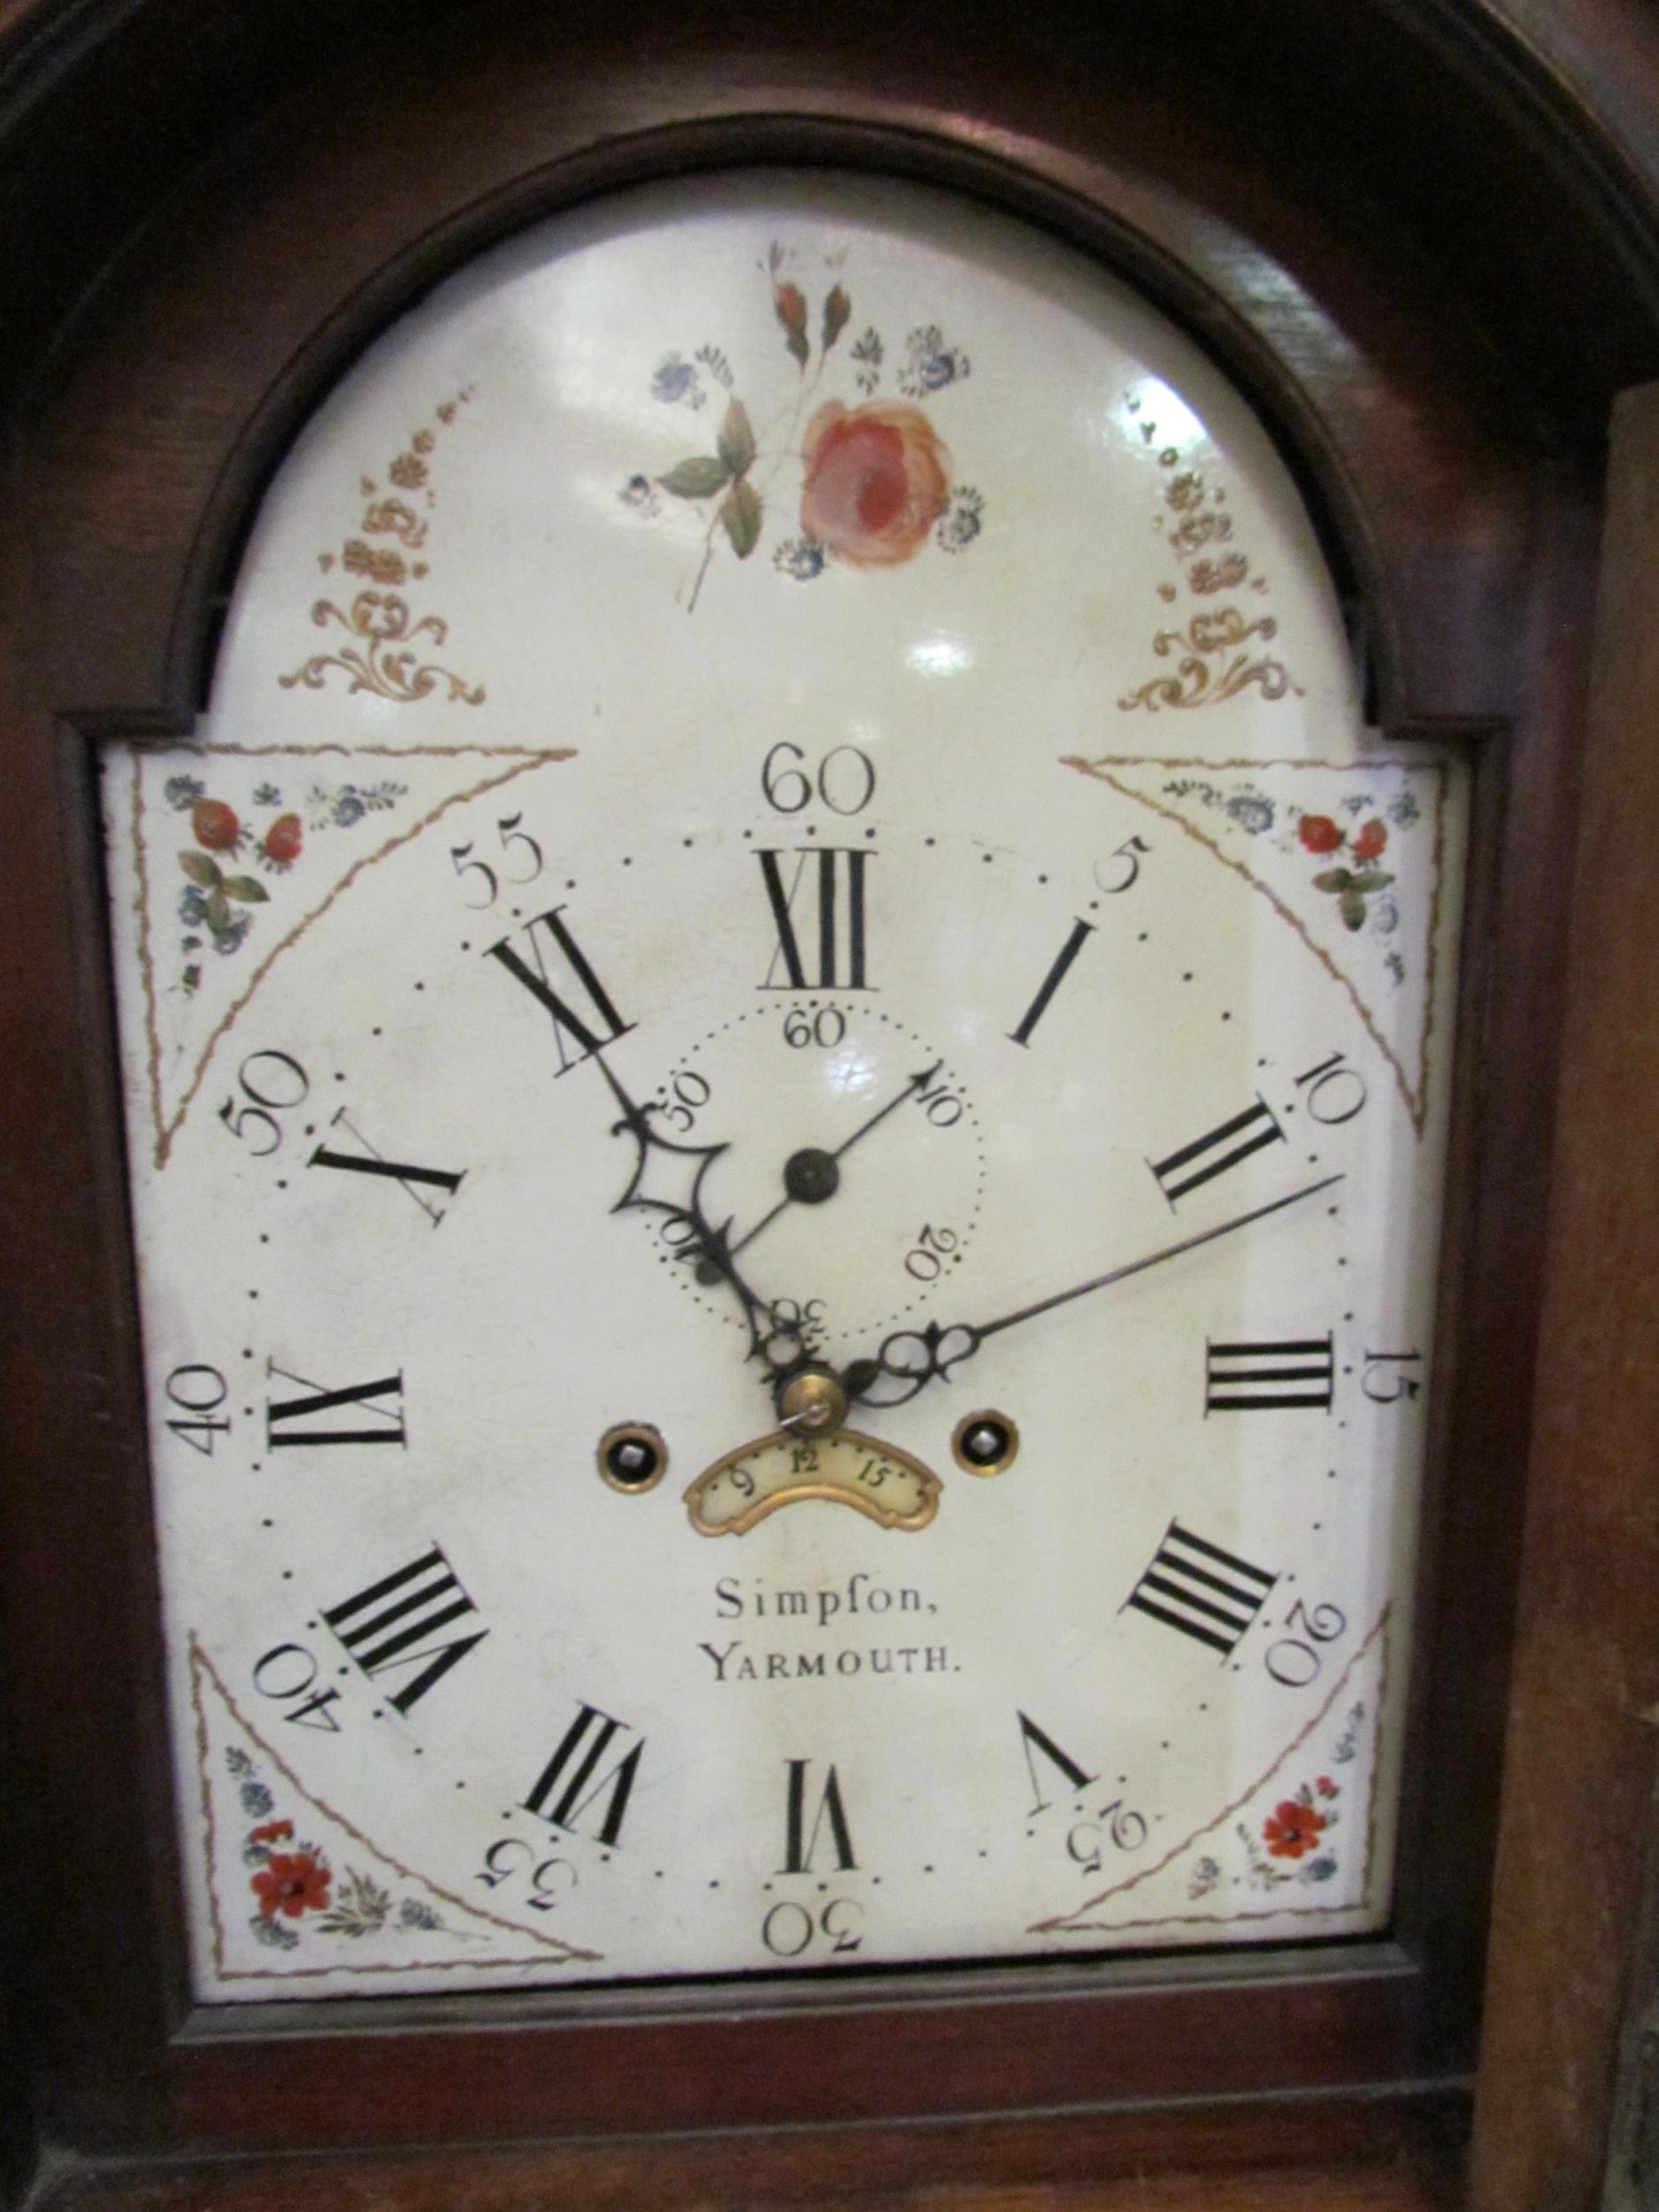 A late 18th Century mahogany longcase clock, the painted face named "Simpson, Yarmouth", with key, - Image 2 of 4